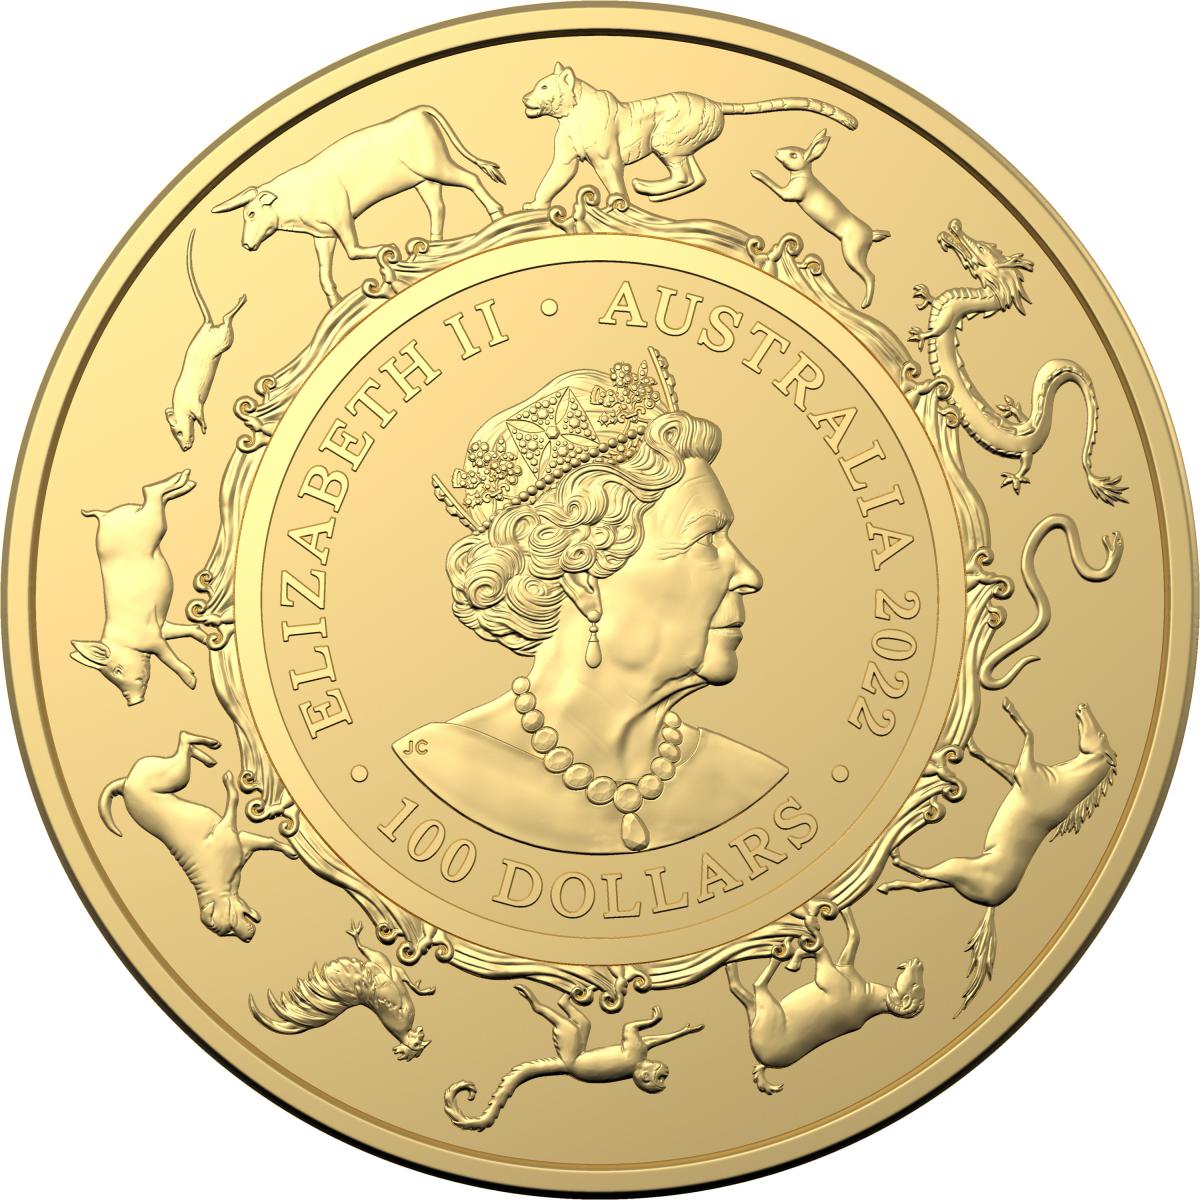 Shop by Category - Royal Australian Mint - Page 1 - The Coin Company